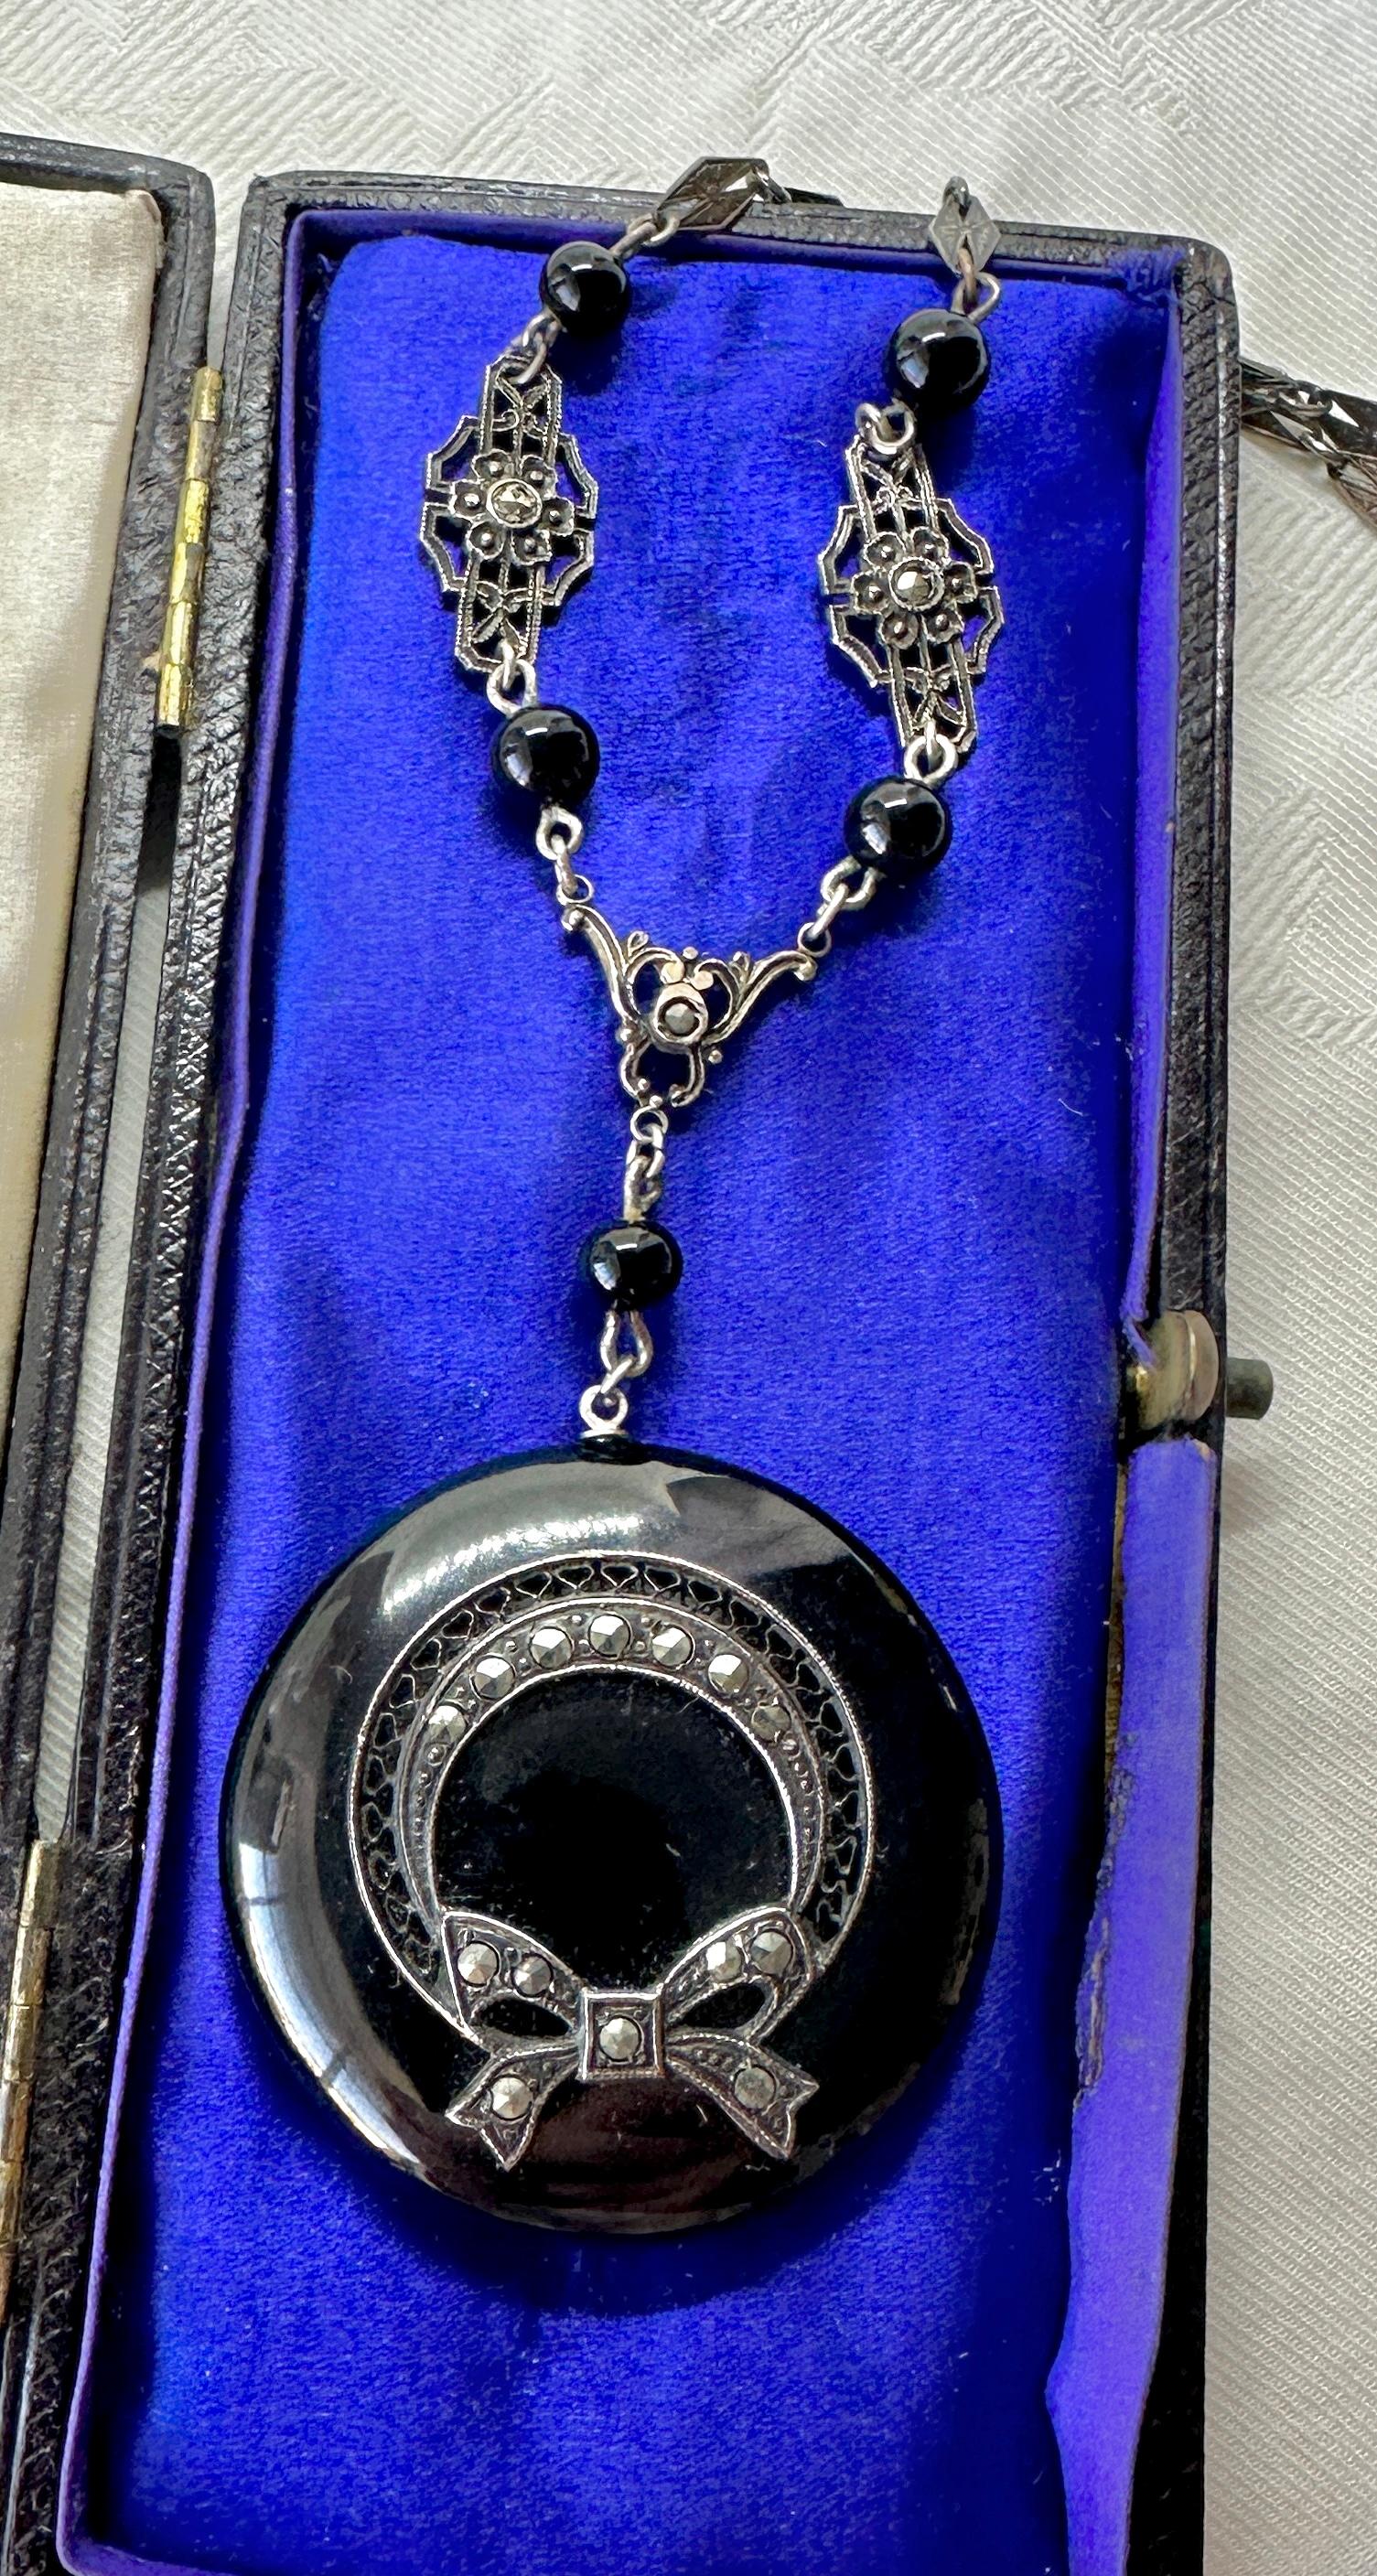 THIS IS A STUNNING ORIGINAL ANTIQUE ART DECO BLACK ONYX MARCASITE NECKLACE OF THE FINEST QUALITY.  THE PENDANT NECKLACE HAS A MAGNIFICENT ROUND BLACK ONYX PENDANT SET WITH A STERLING SILVER BOW MOTIF DESIGN WITH MARCASITE GEMS.  THE PENDANT HANGS